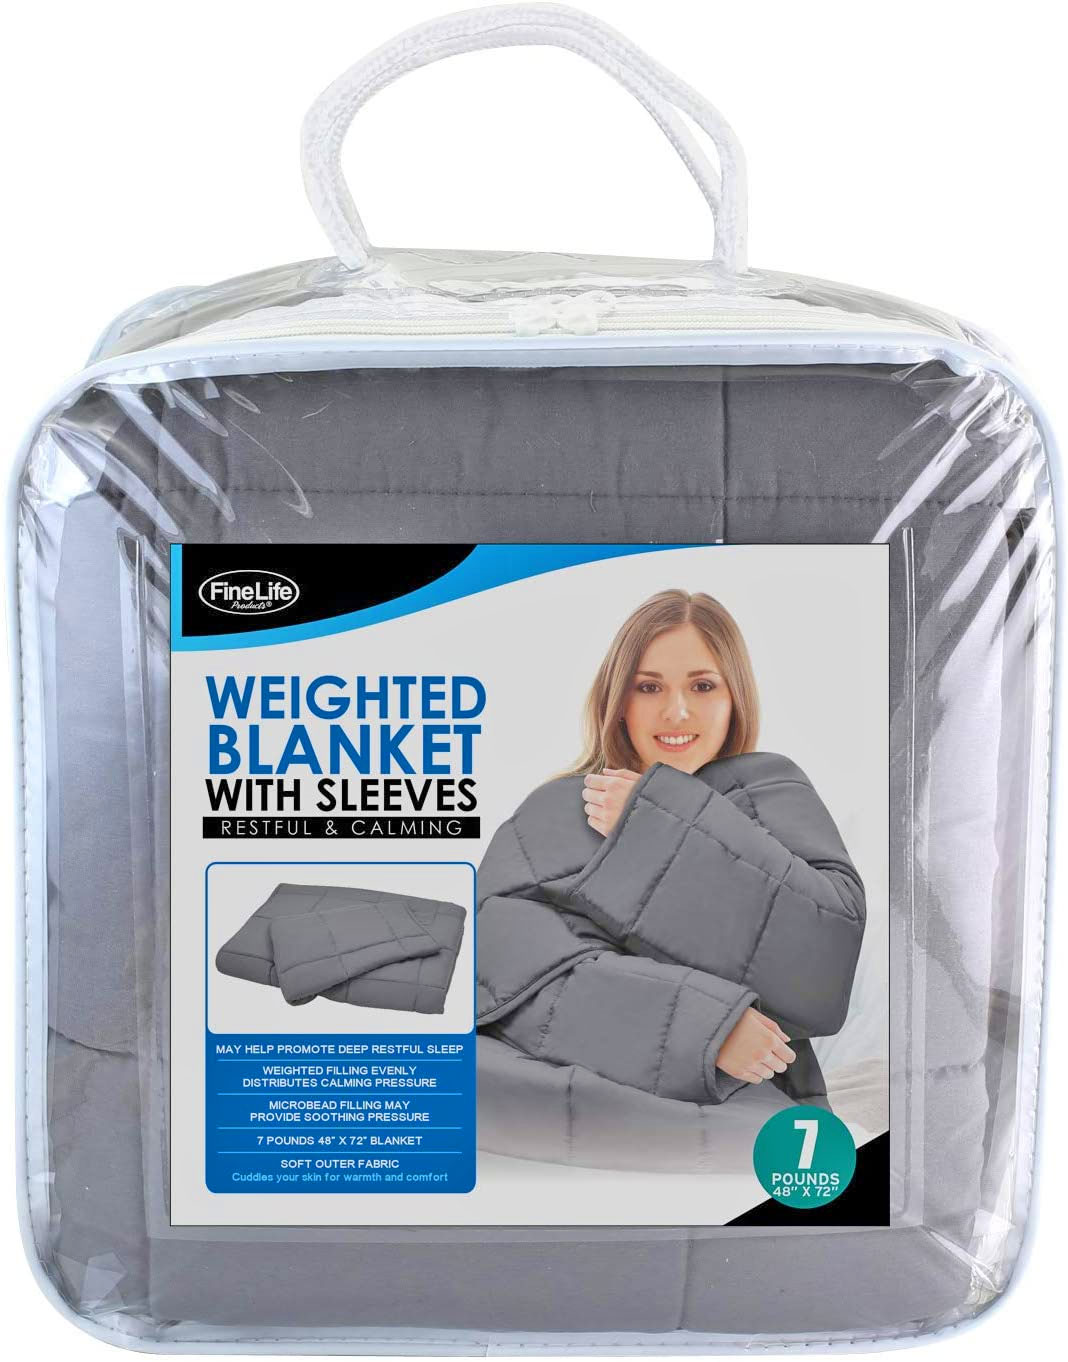 Weighted Blanket with Sleeves - Snuggie Weighted Blanket